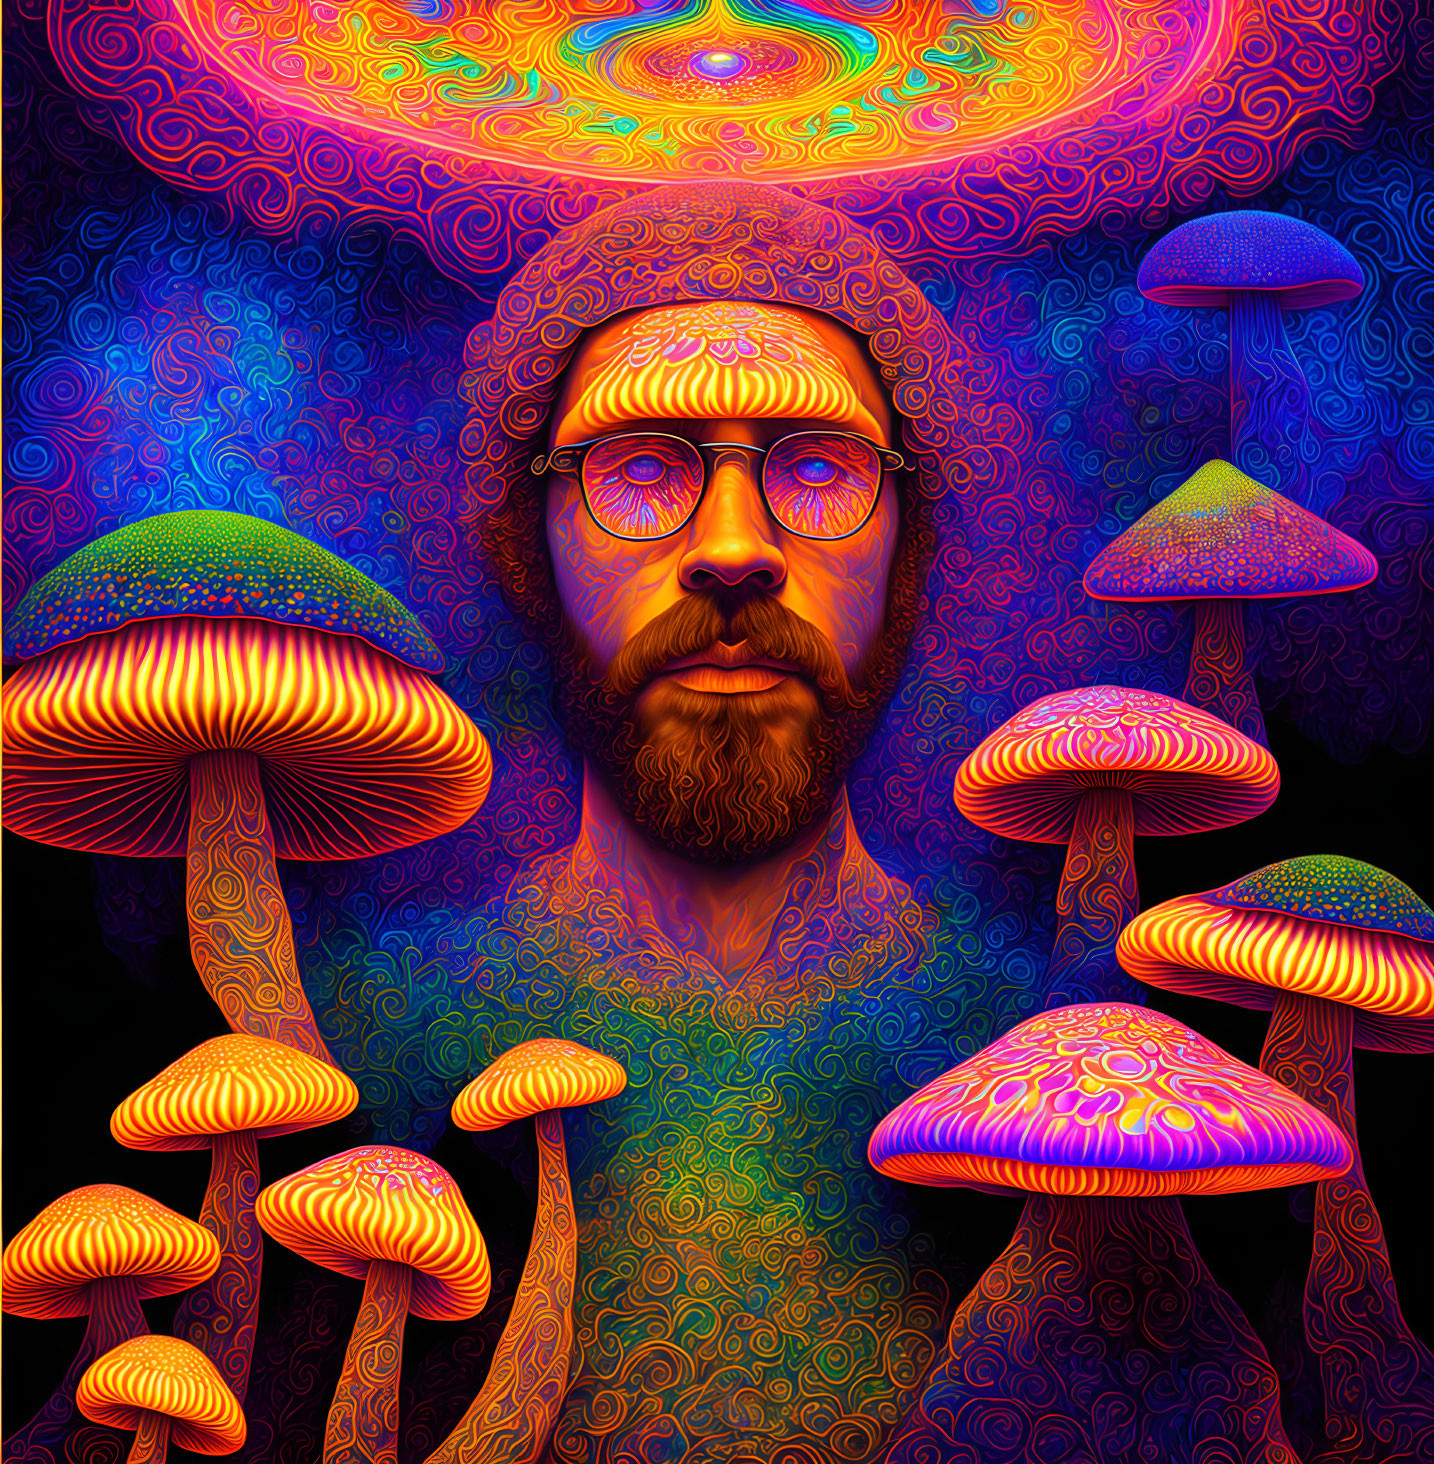 Colorful Psychedelic Portrait with Bearded Figure and Neon Mushrooms